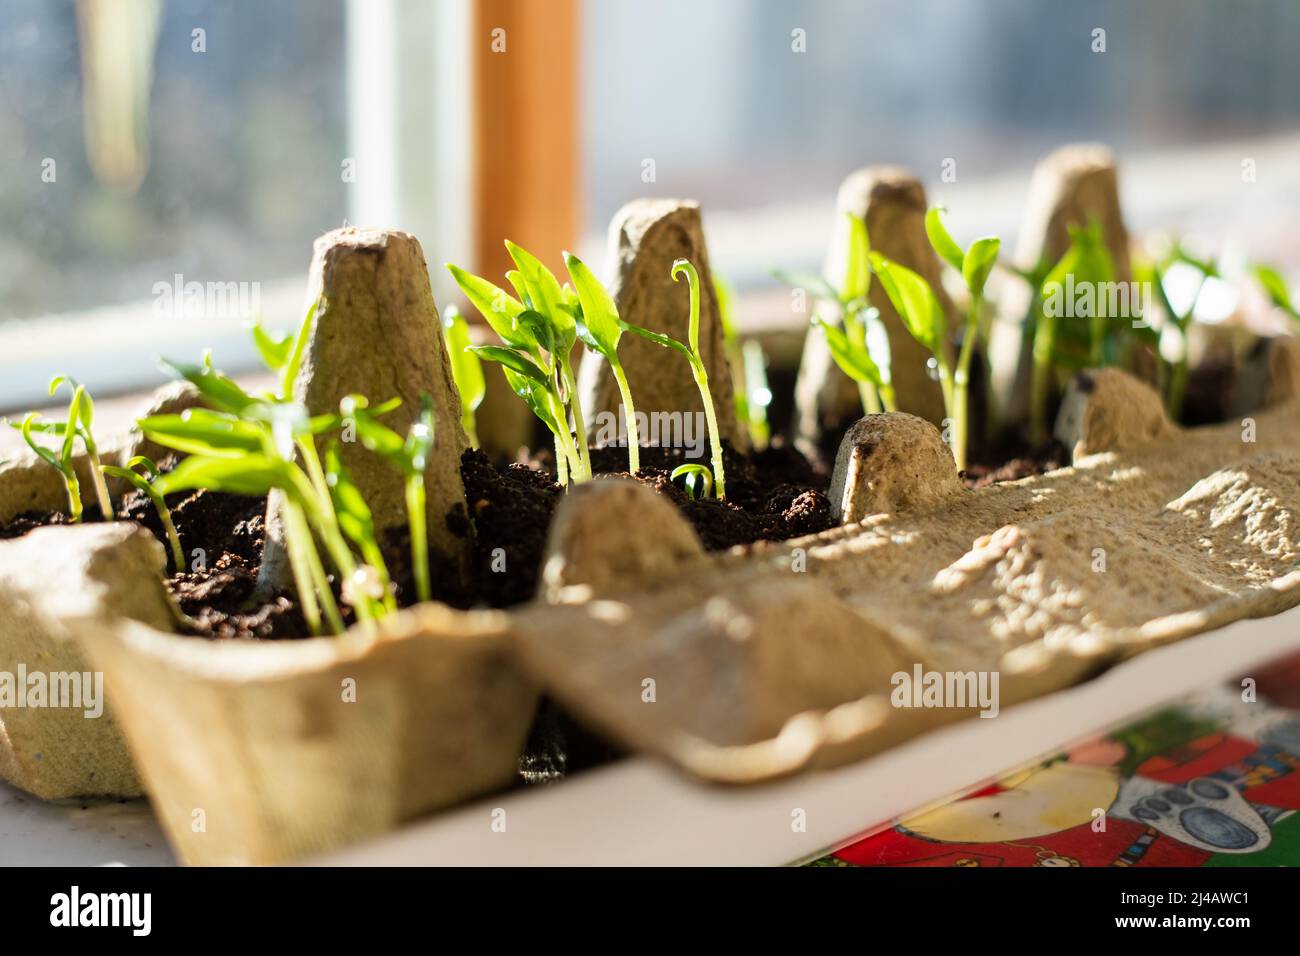 Seedling in egg carton. Growing shoots on window during spring. Self sufficient and sustainable living and gardening. Grow your own vegetables at home. Stock Photo